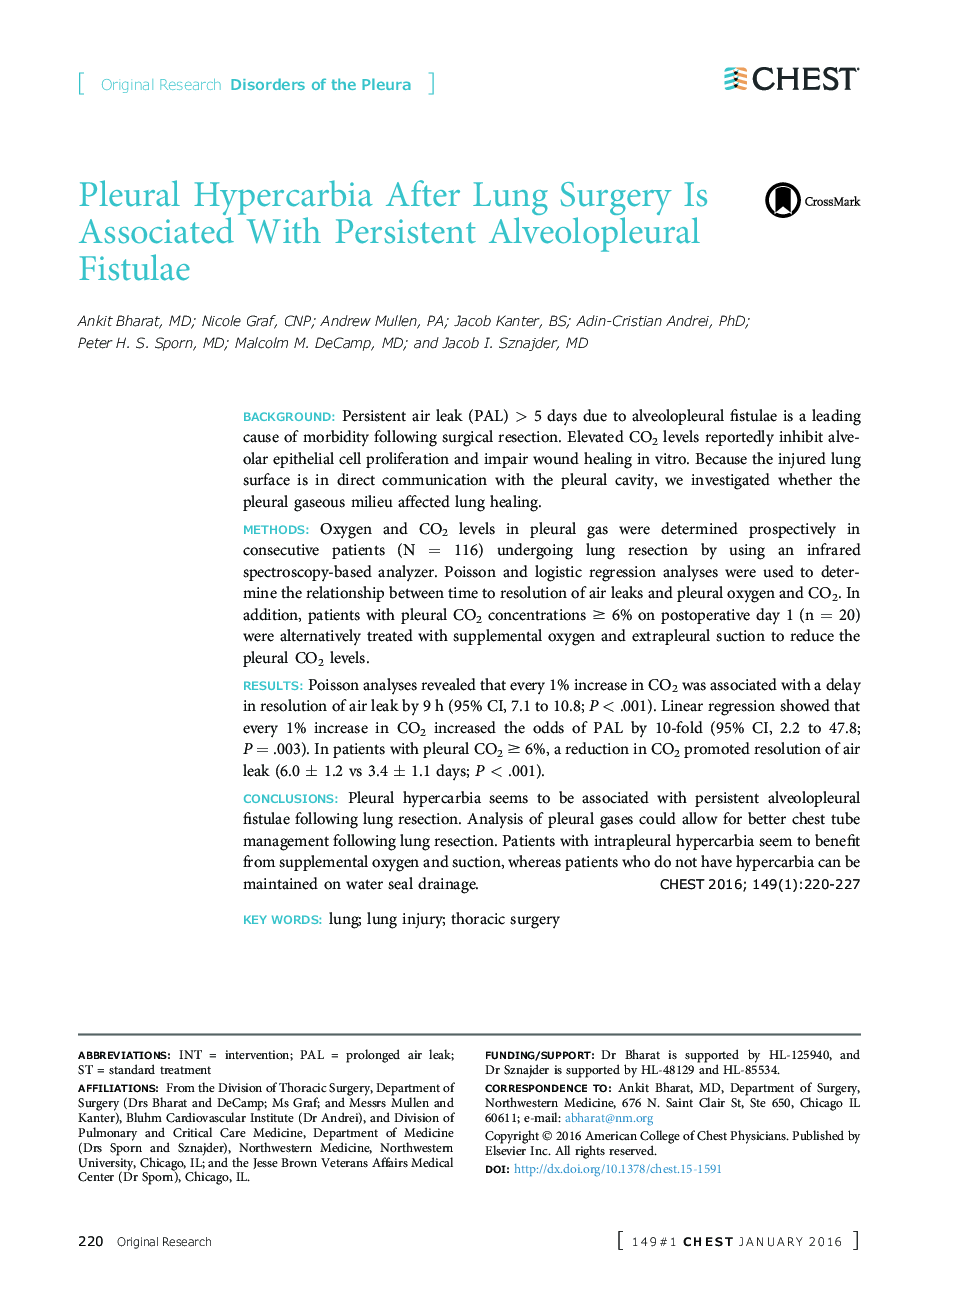 Pleural Hypercarbia After Lung Surgery Is Associated With Persistent Alveolopleural Fistulae